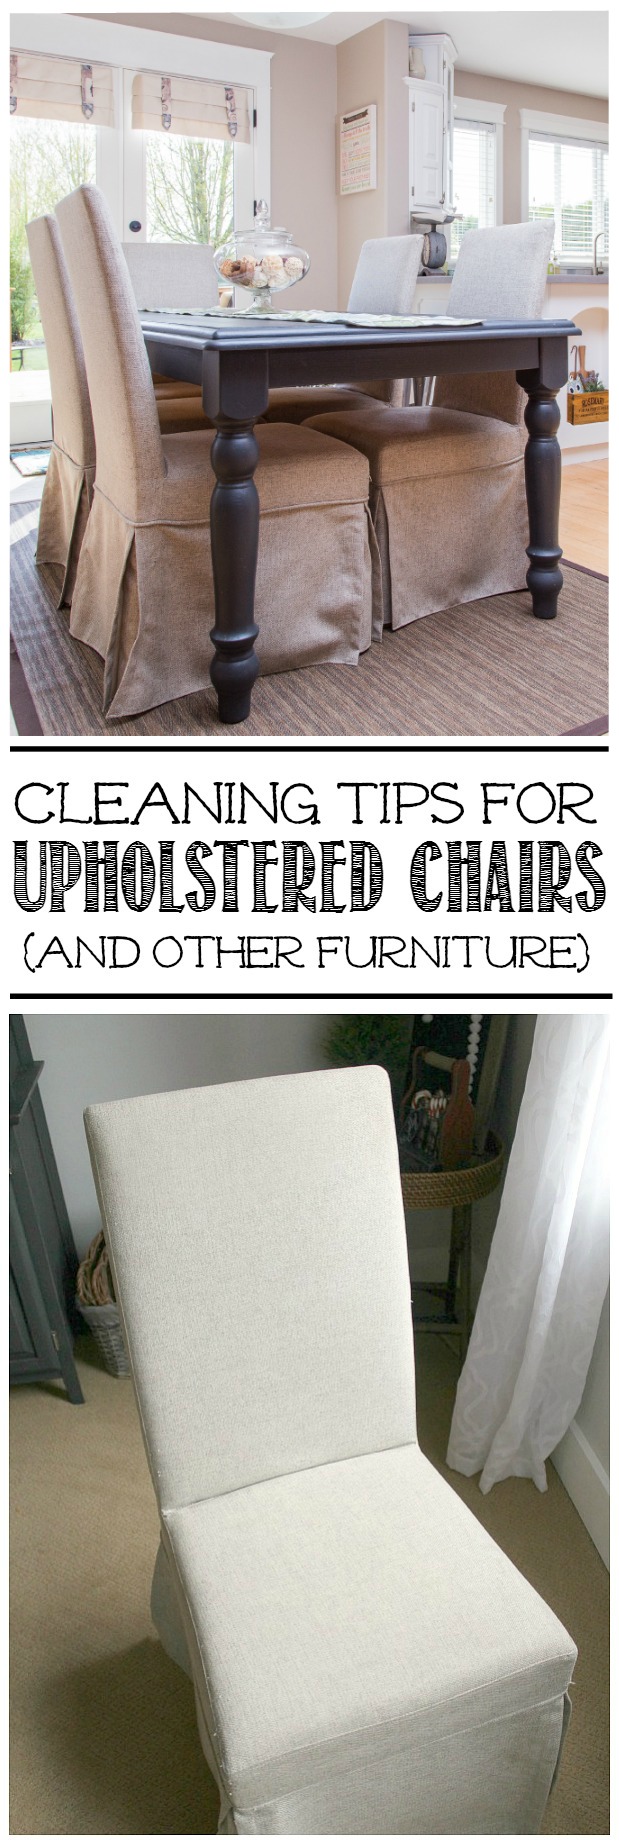 How To Clean Upholstered Chairs, How To Clean Cloth Covered Dining Room Chairs